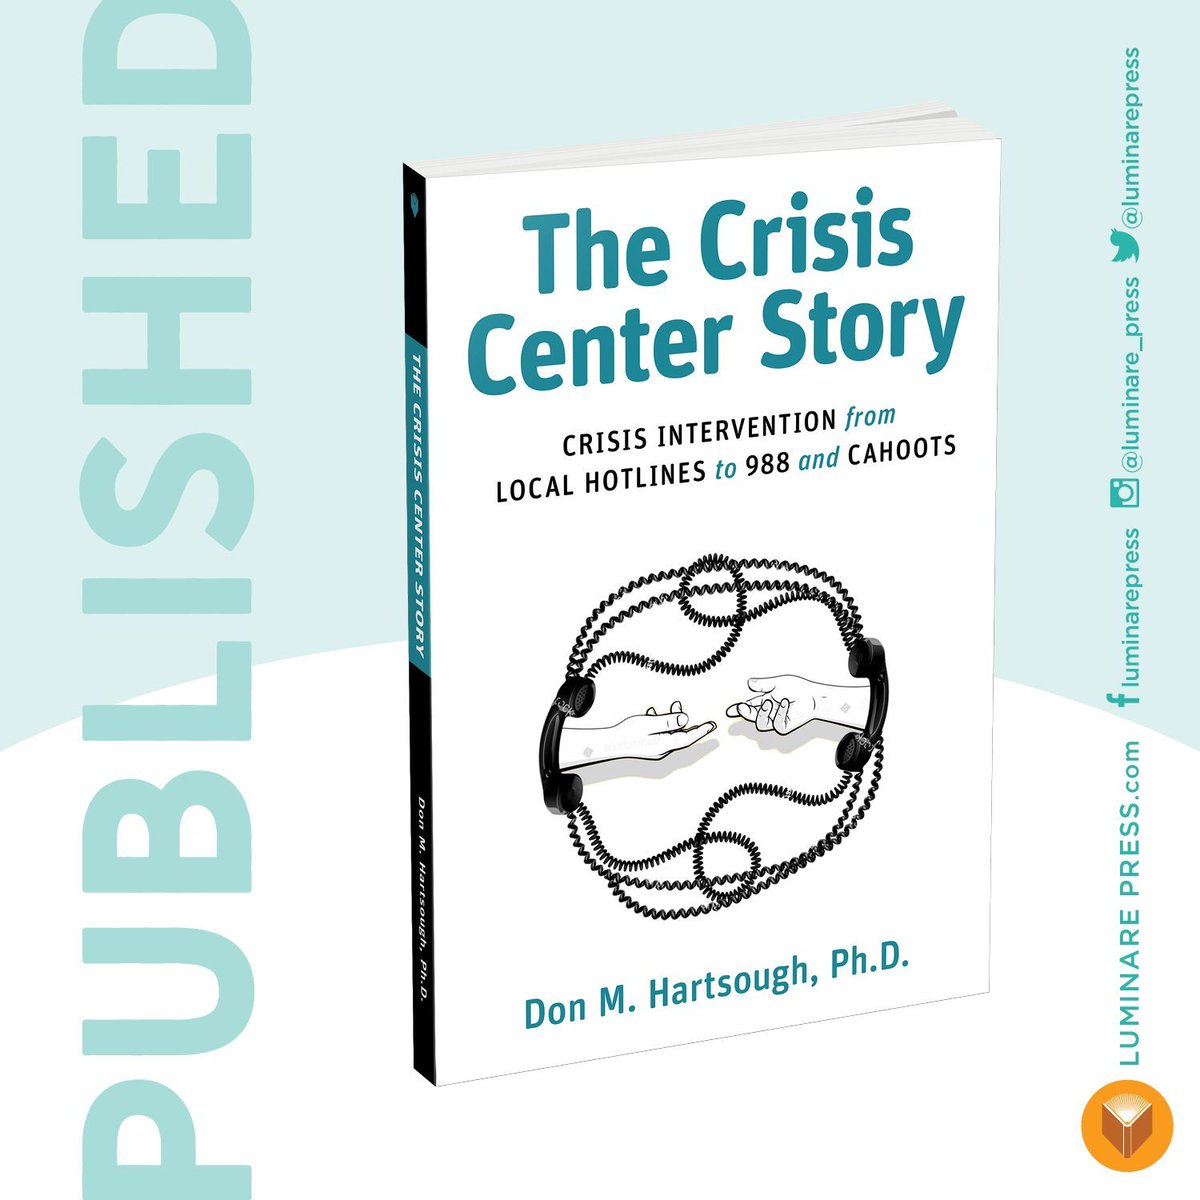 The Crisis Center Story: Crisis Intervention from Local Hotlines to 988 and CAHOOTS
By Don M. Hartsough, Ph.D.

buff.ly/3WWeoxf
 
#cahoots #memoir #crisis #intervention #crisismanagement #newlypublished #selfpublishing #books  #authorlife #indieauthors #authorslife #ad